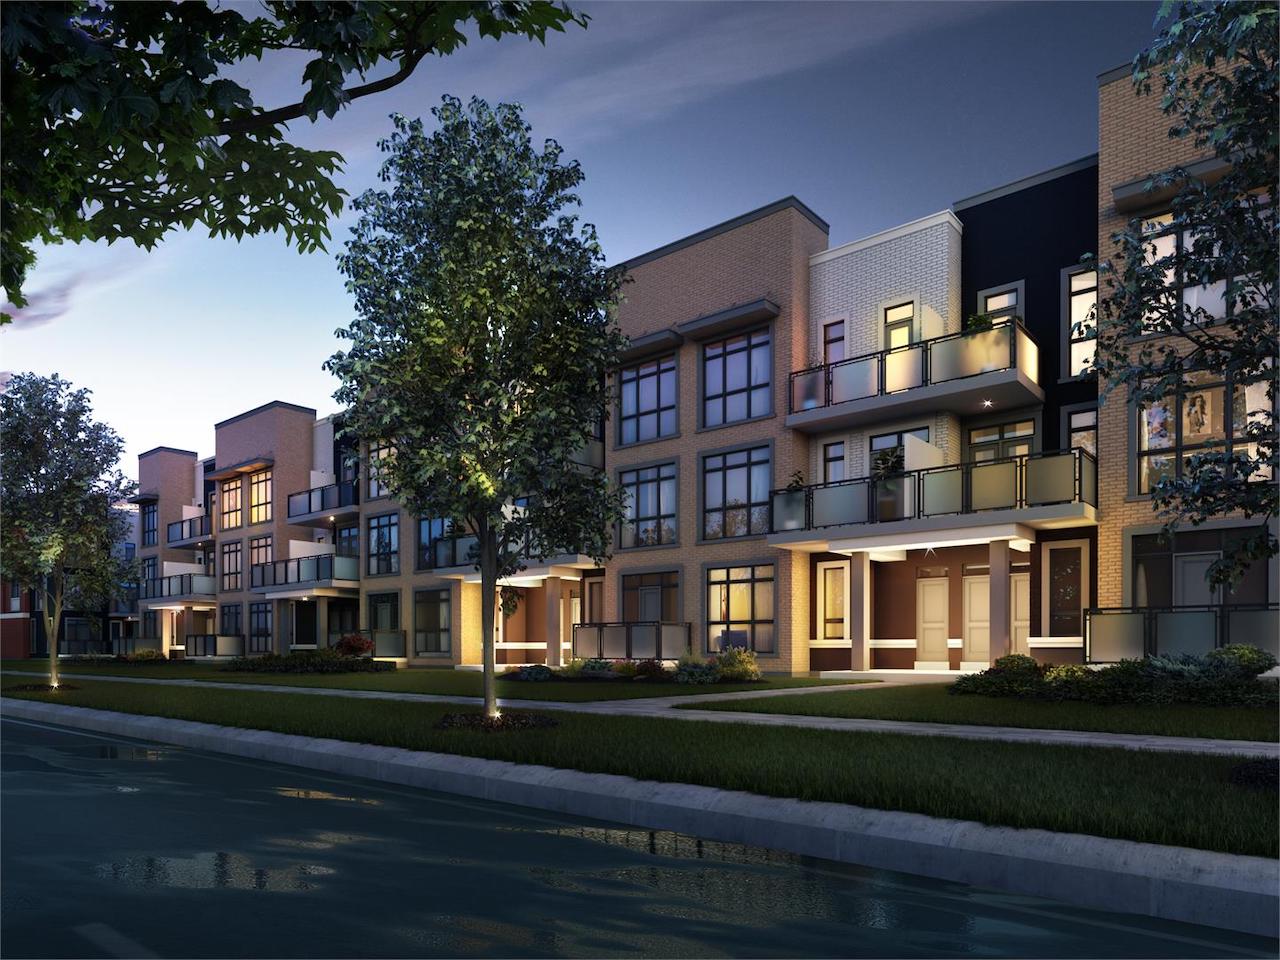 Exterior rendering of The Bond towns street-facing view at night.